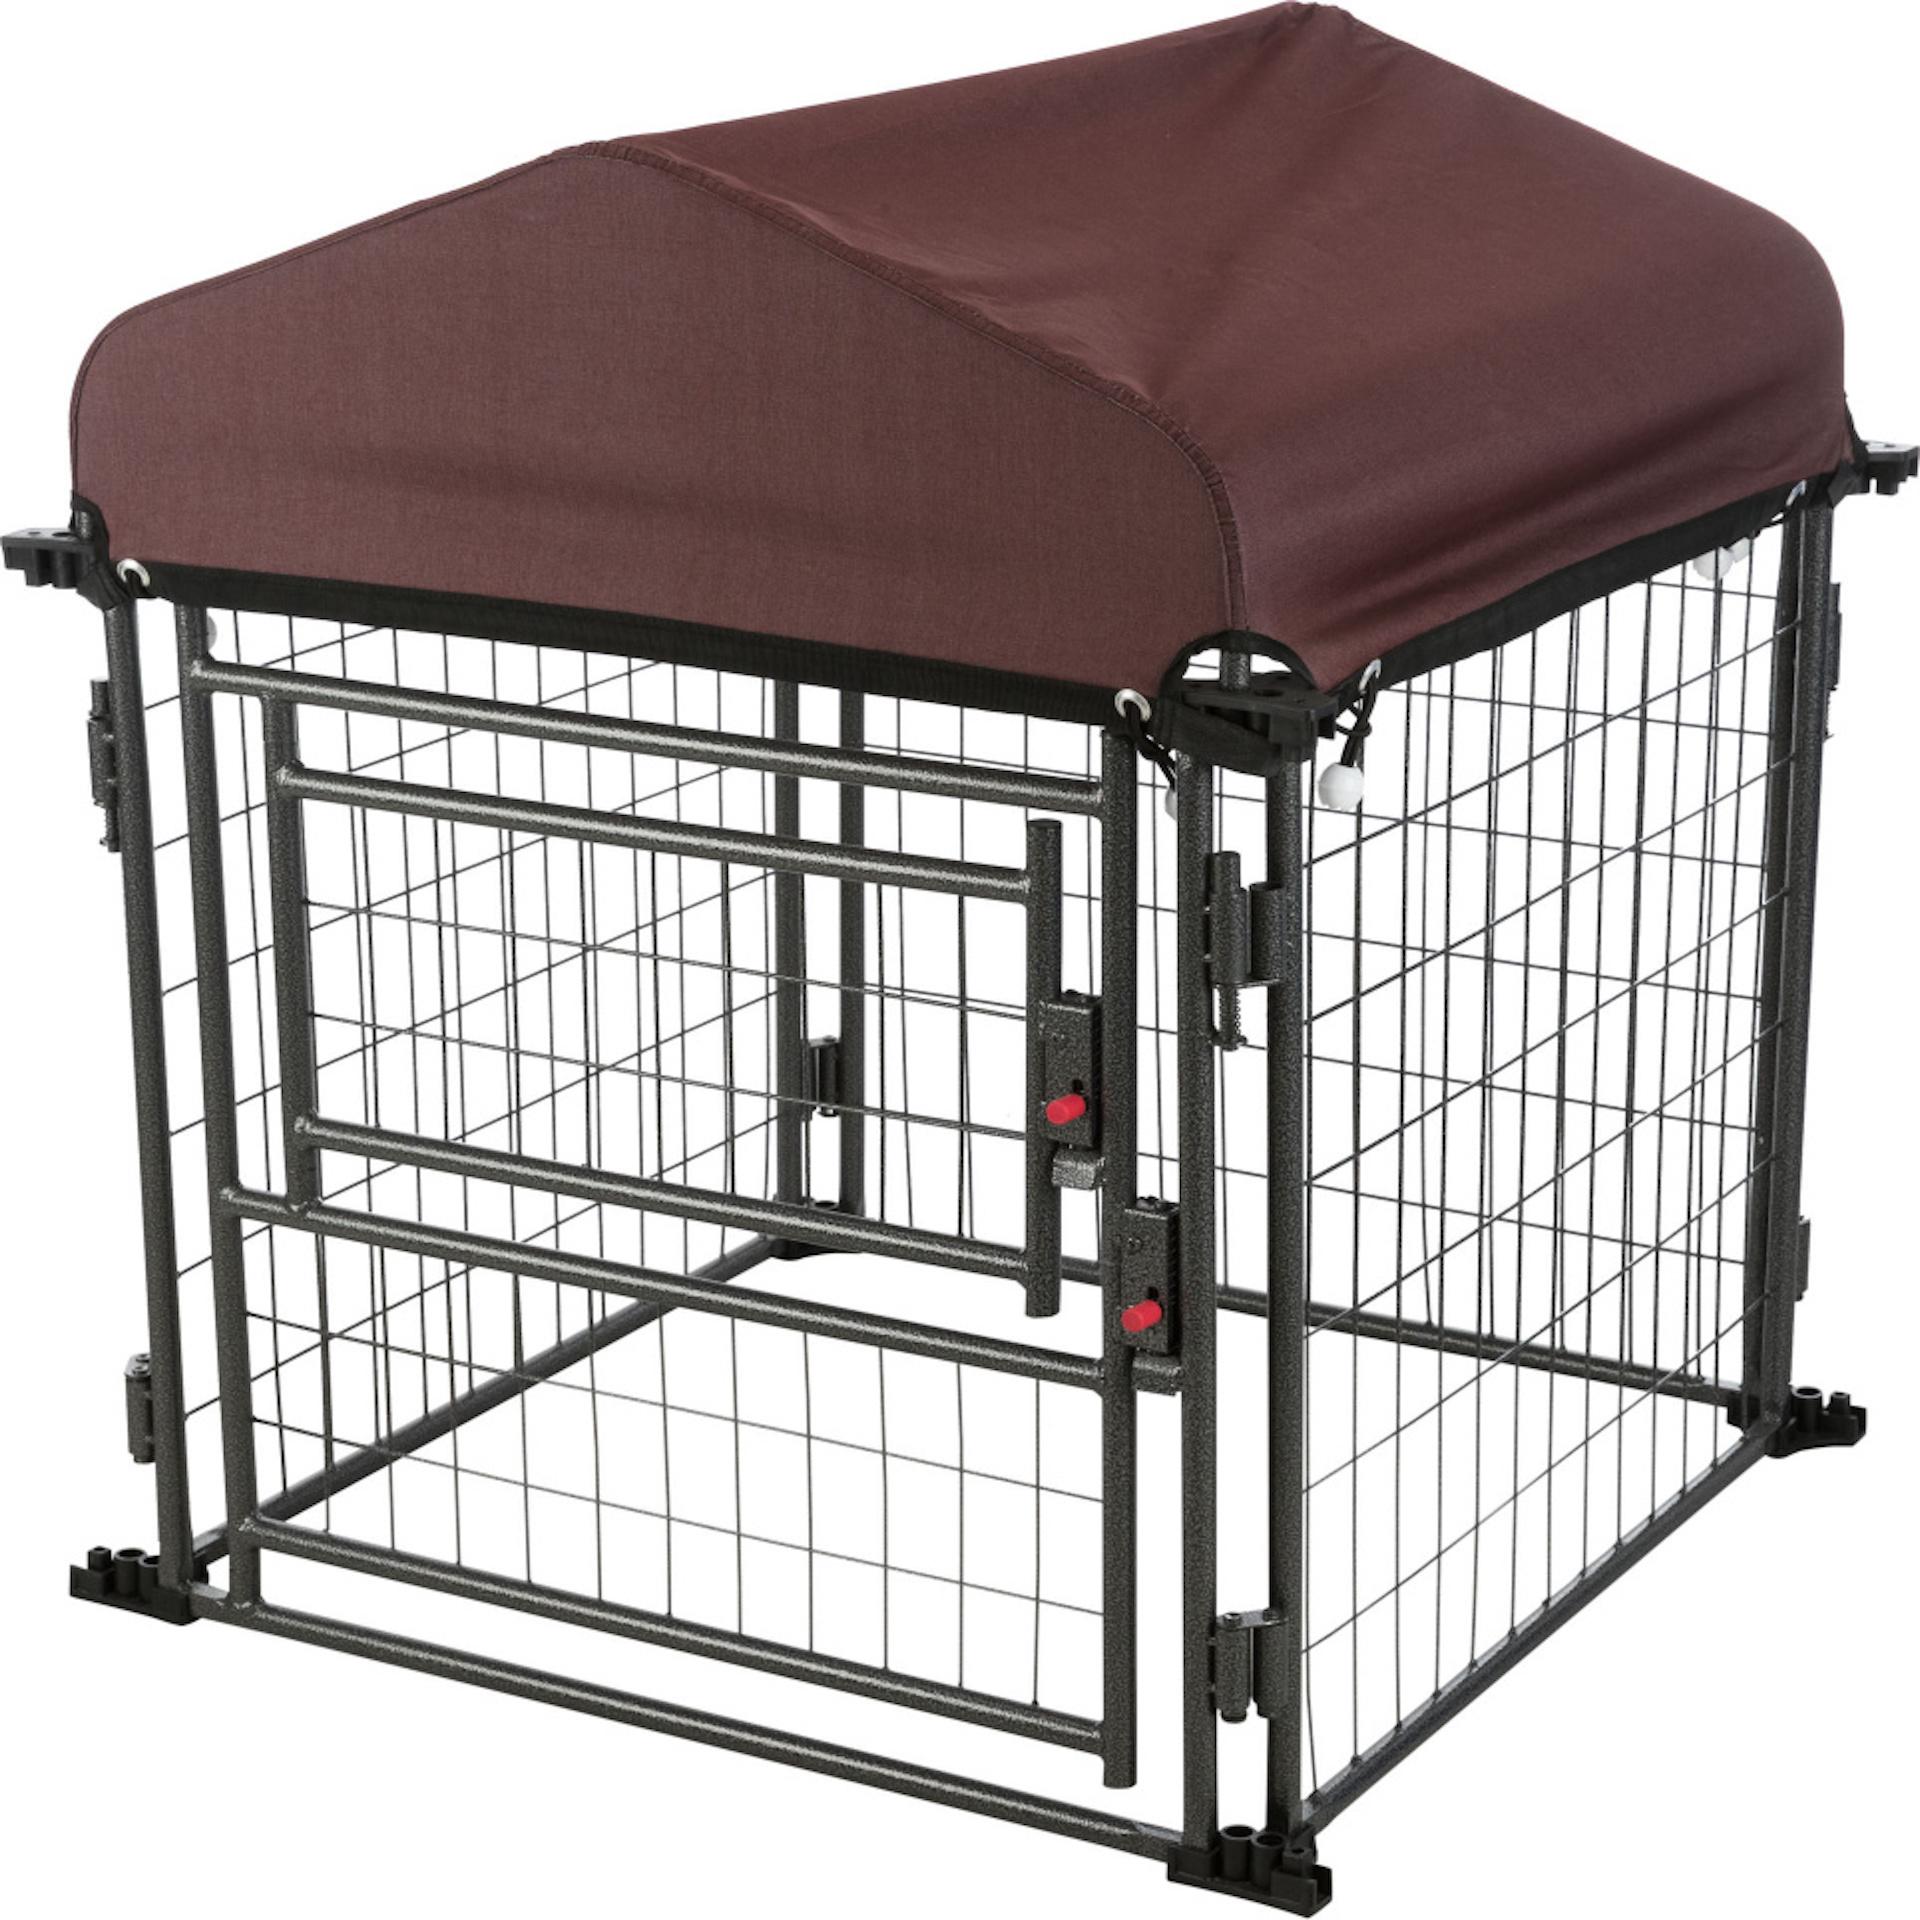 Trixie Deluxe Portable Dog Kennel